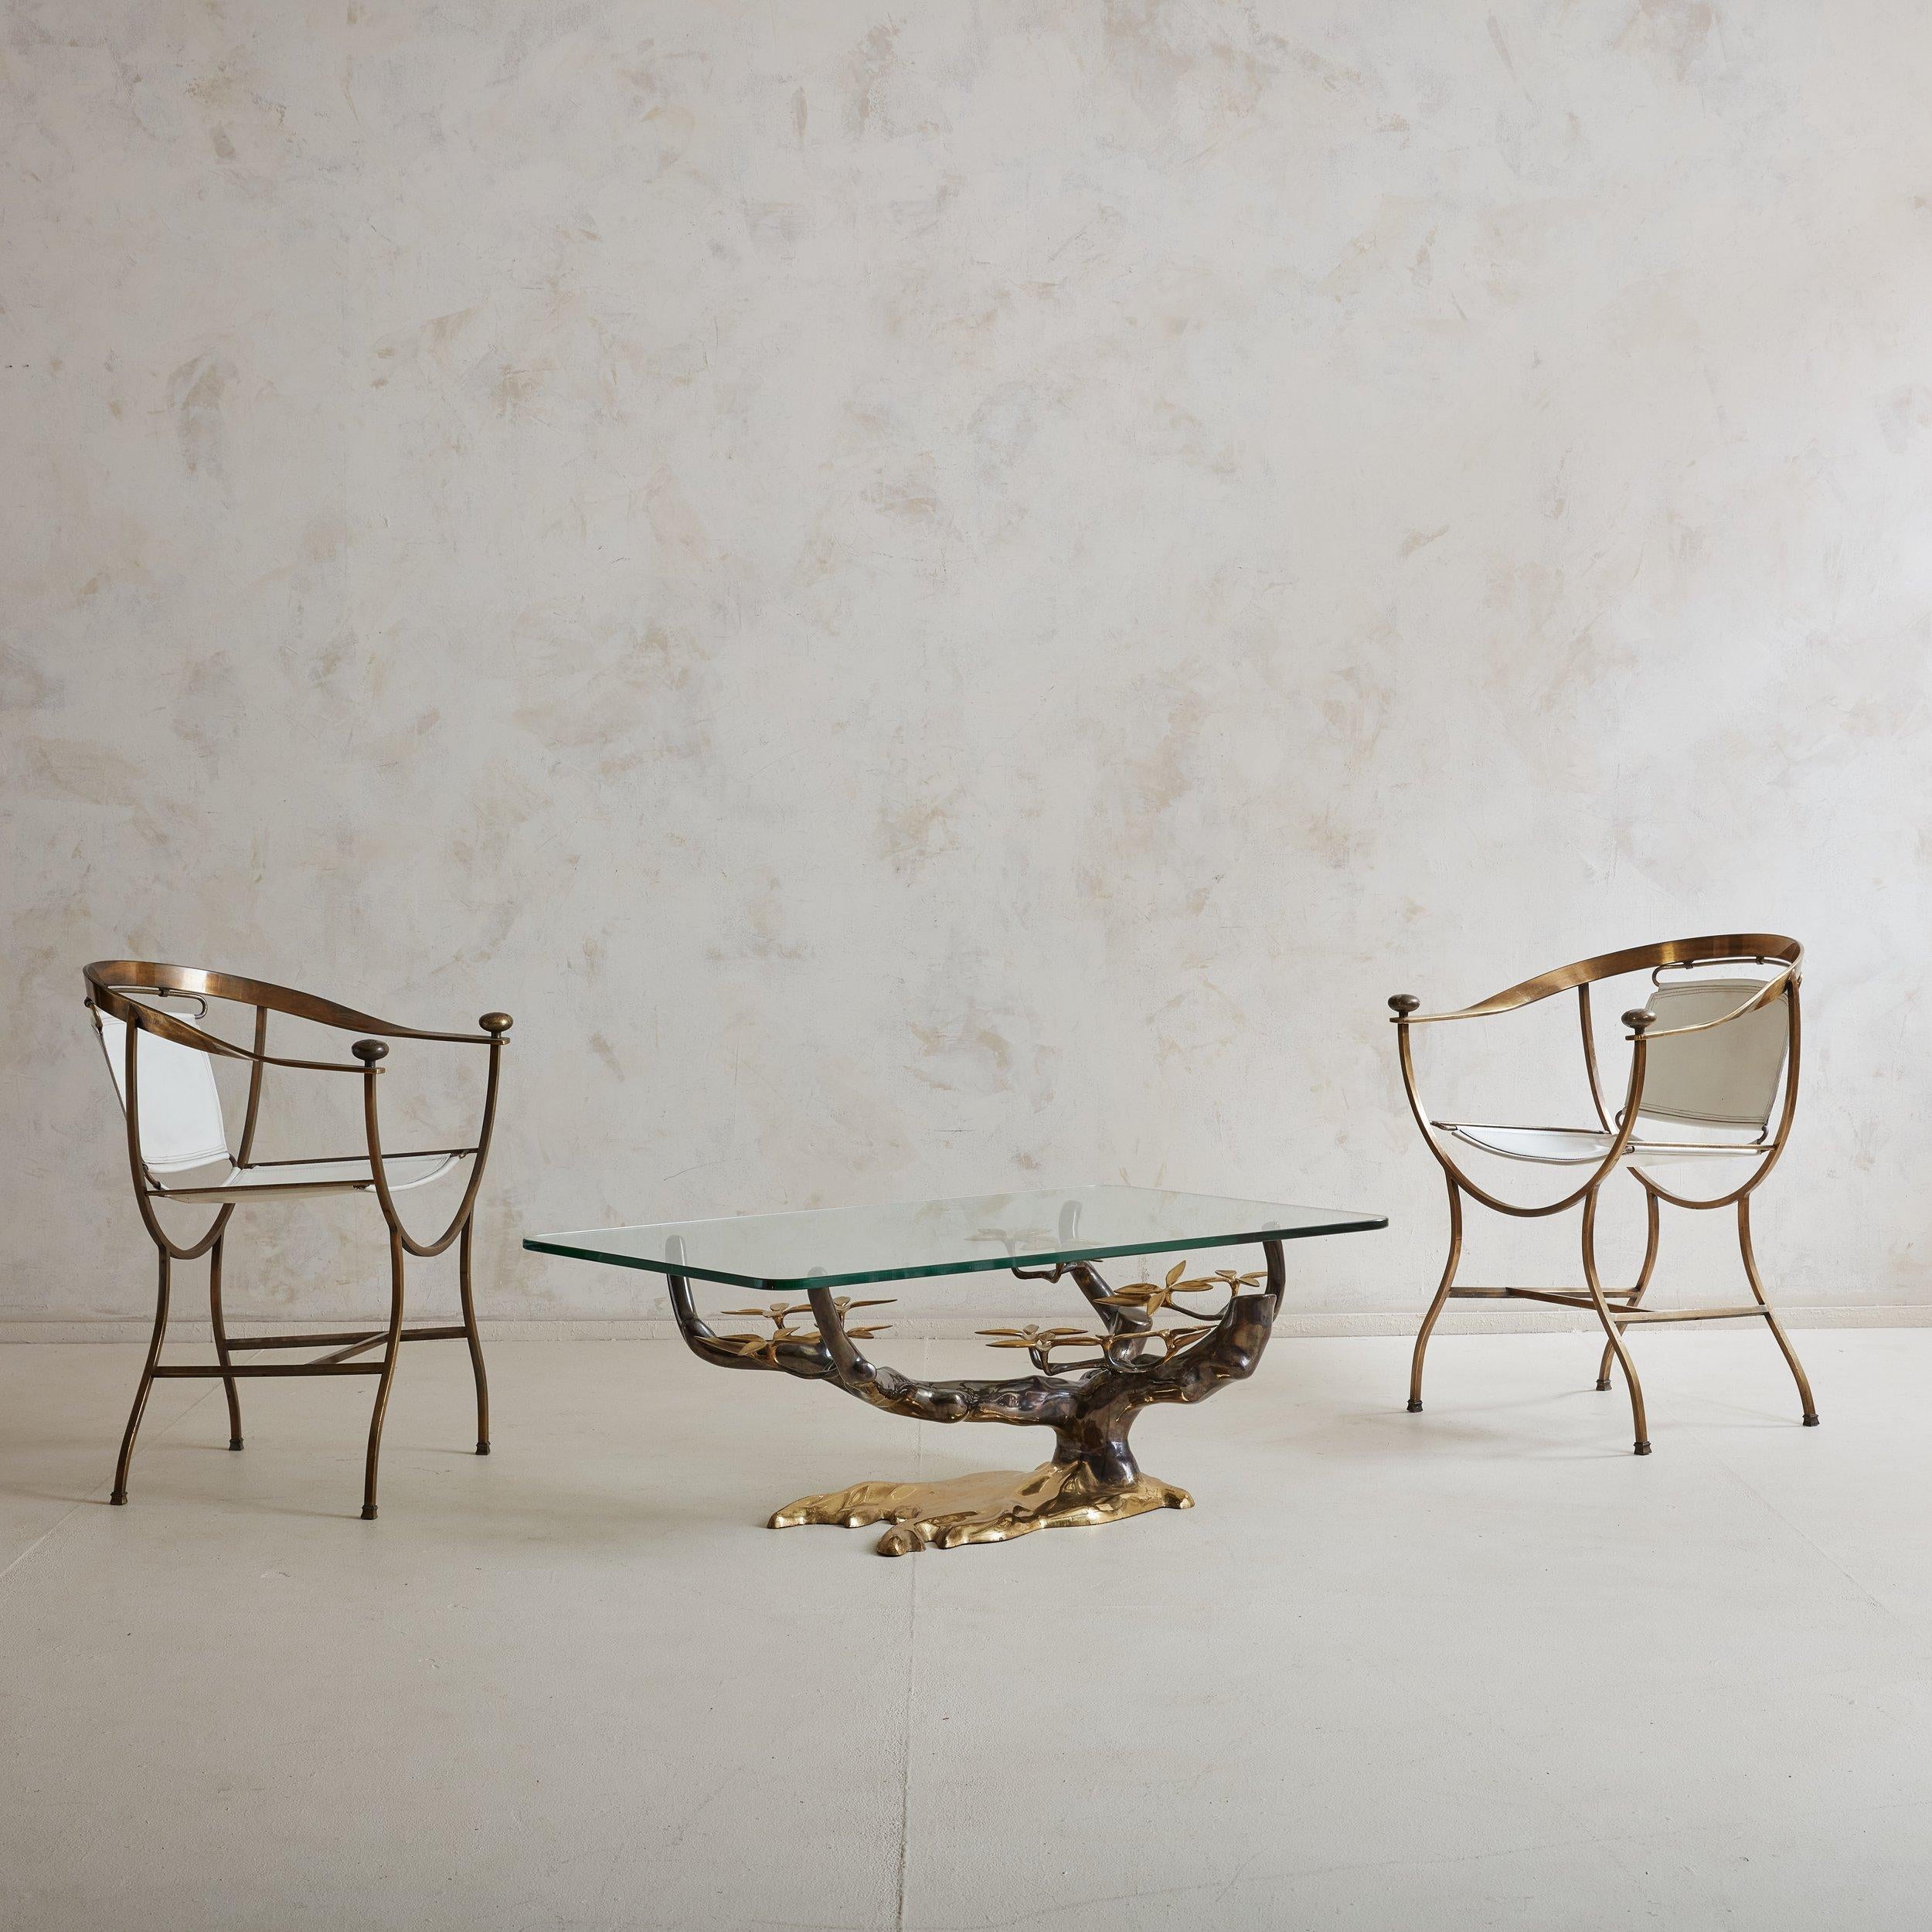 A pair of rare white leather and brass ‘Pompeii’ armchairs designed by Italian designer Alberto Orlandi. These Neoclassical chairs feature elegant curved backrests and white leather sling seats. The brass feet and arm finial details add to the